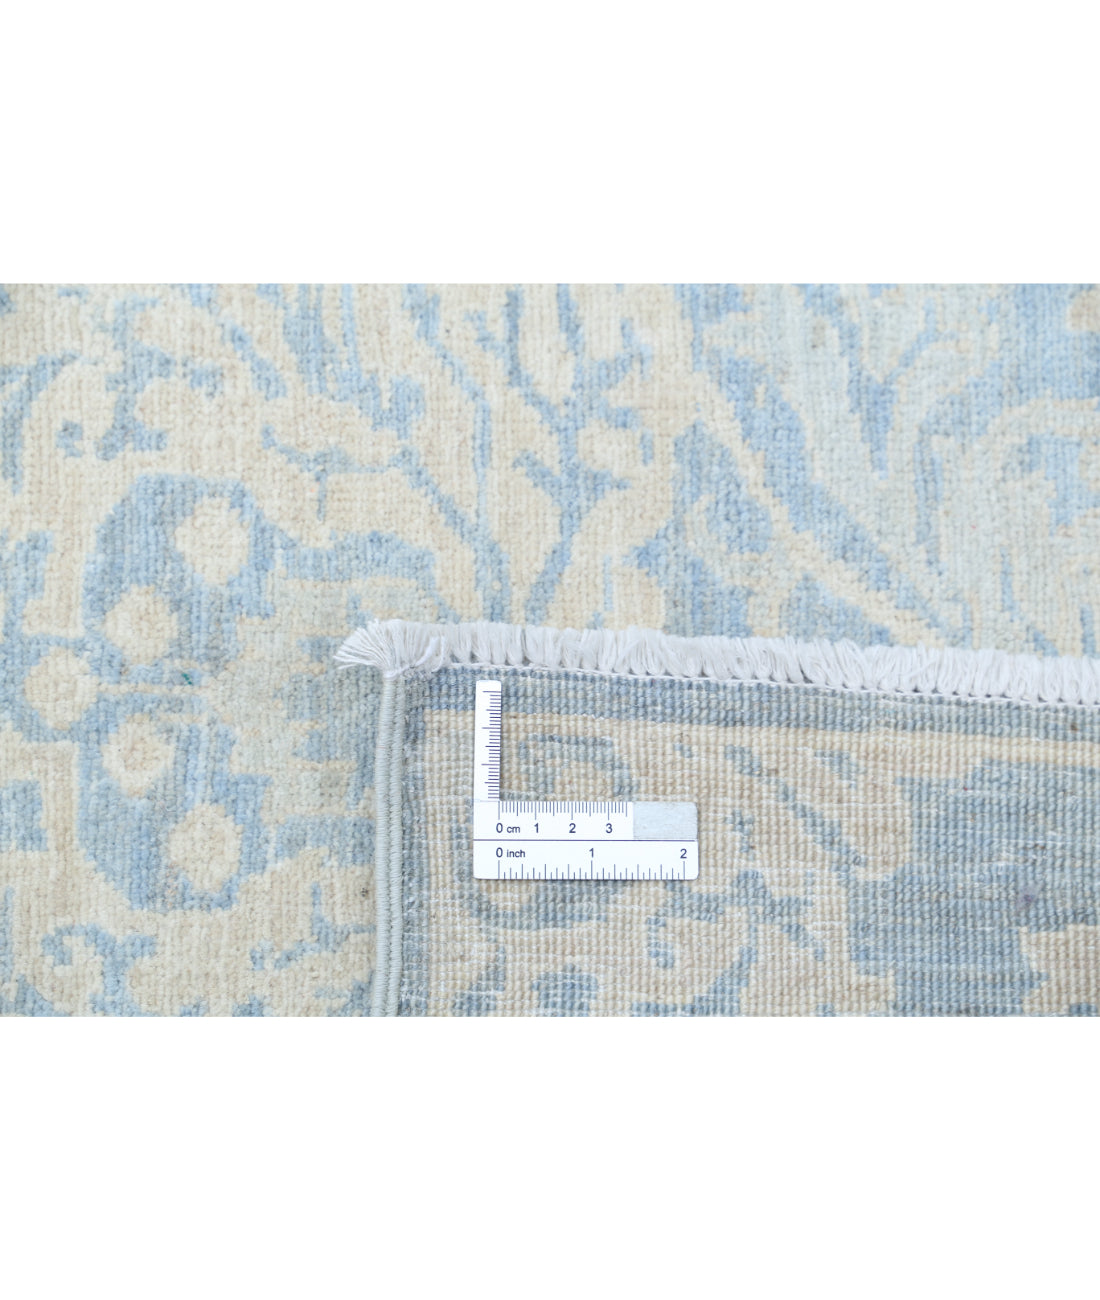 Hand Knotted Art & Craft Wool Rug - 7'9'' x 10'0'' 7'9'' x 10'0'' (233 X 300) / Grey / Taupe